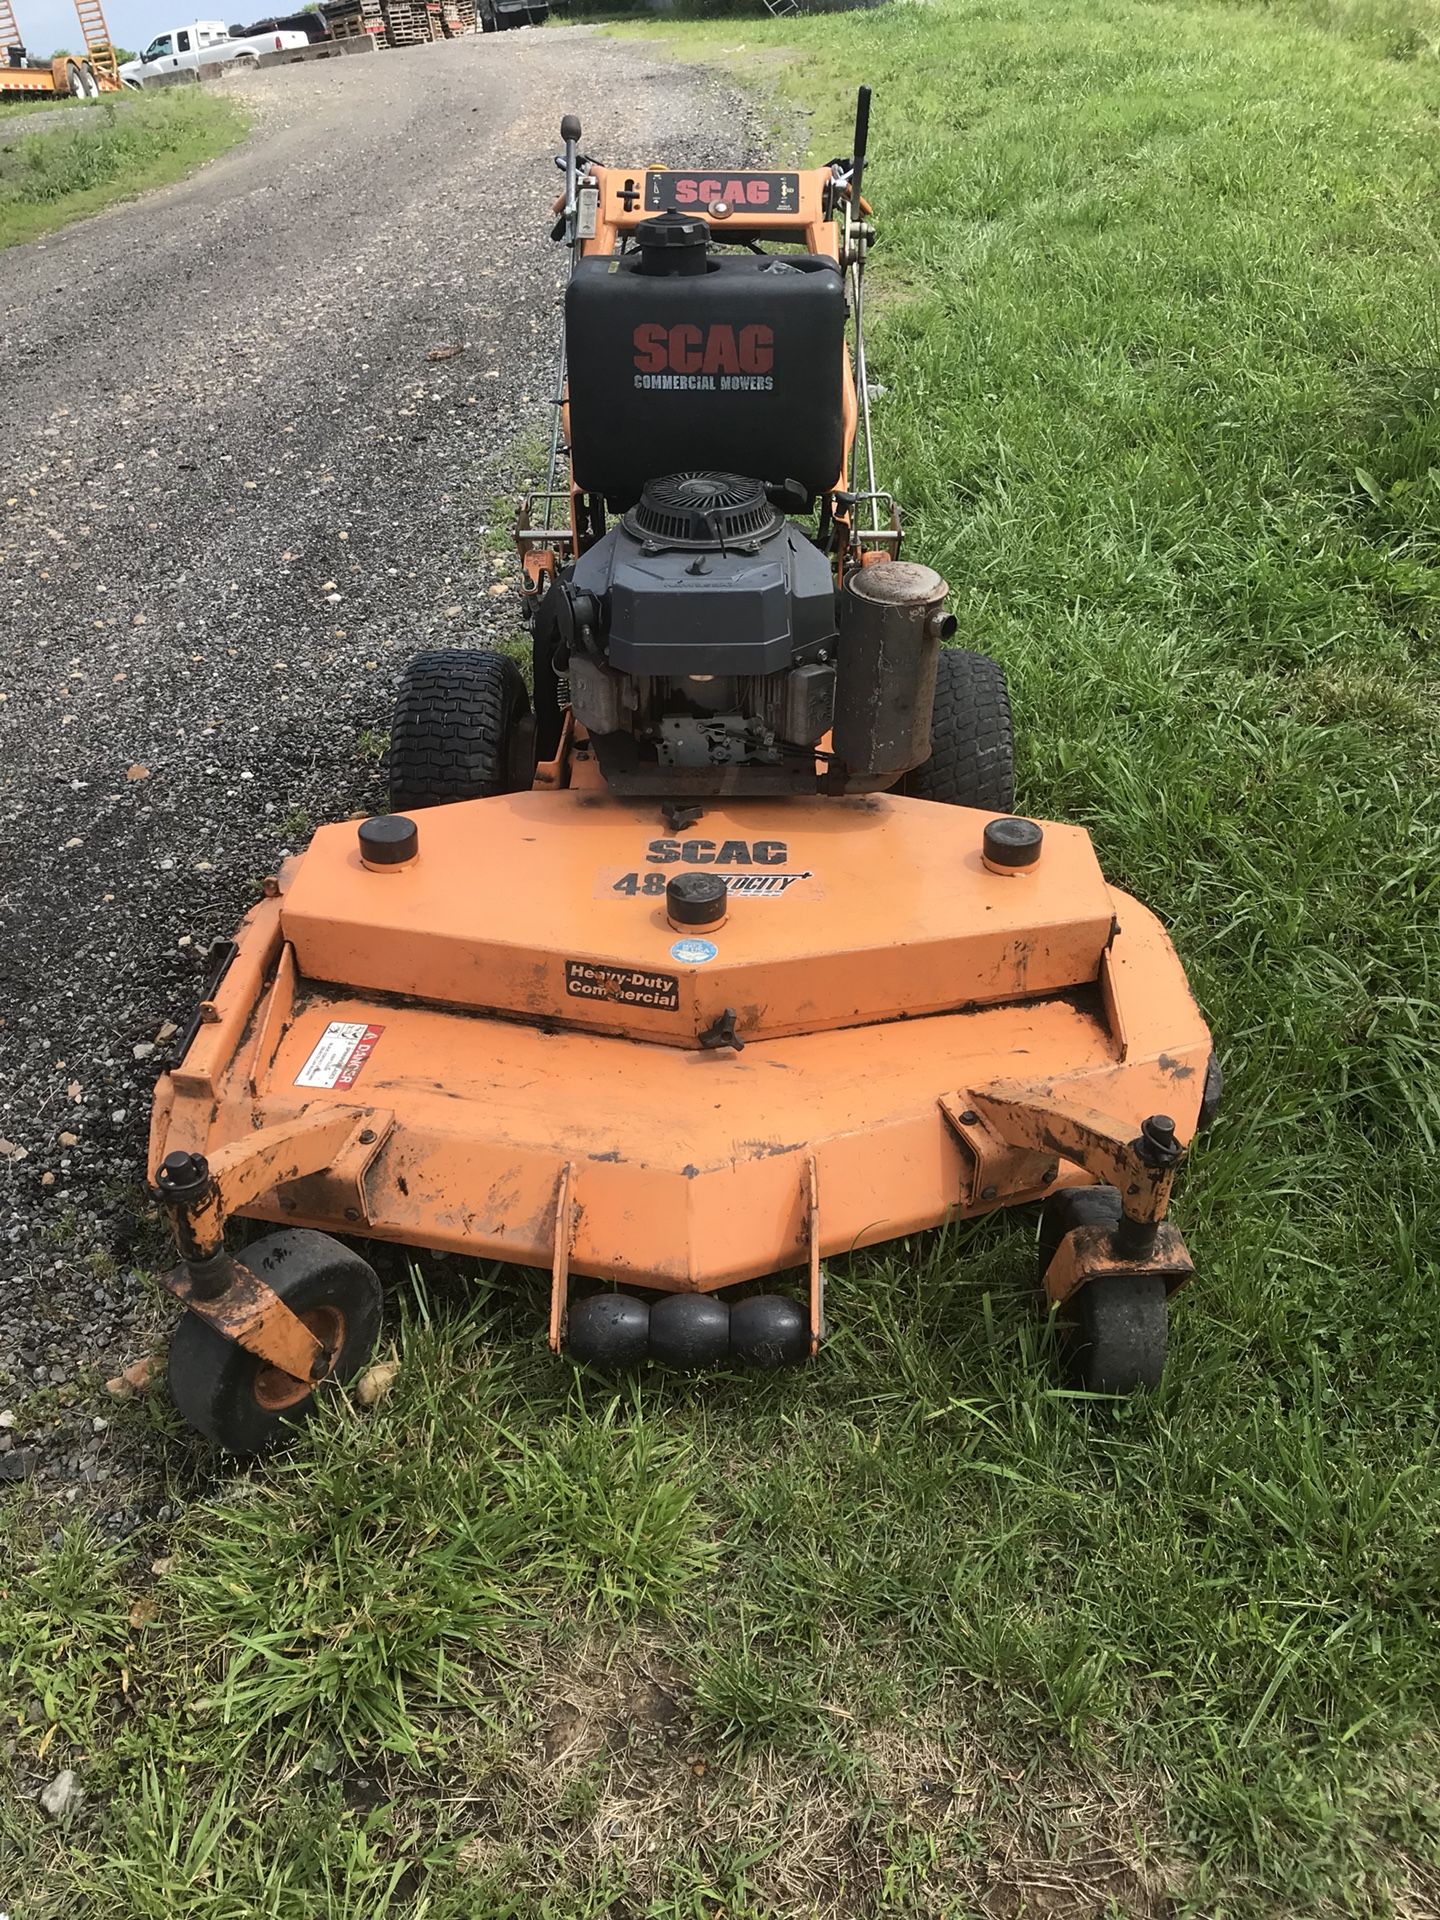 48 scag hydro mower In good condition ready to work